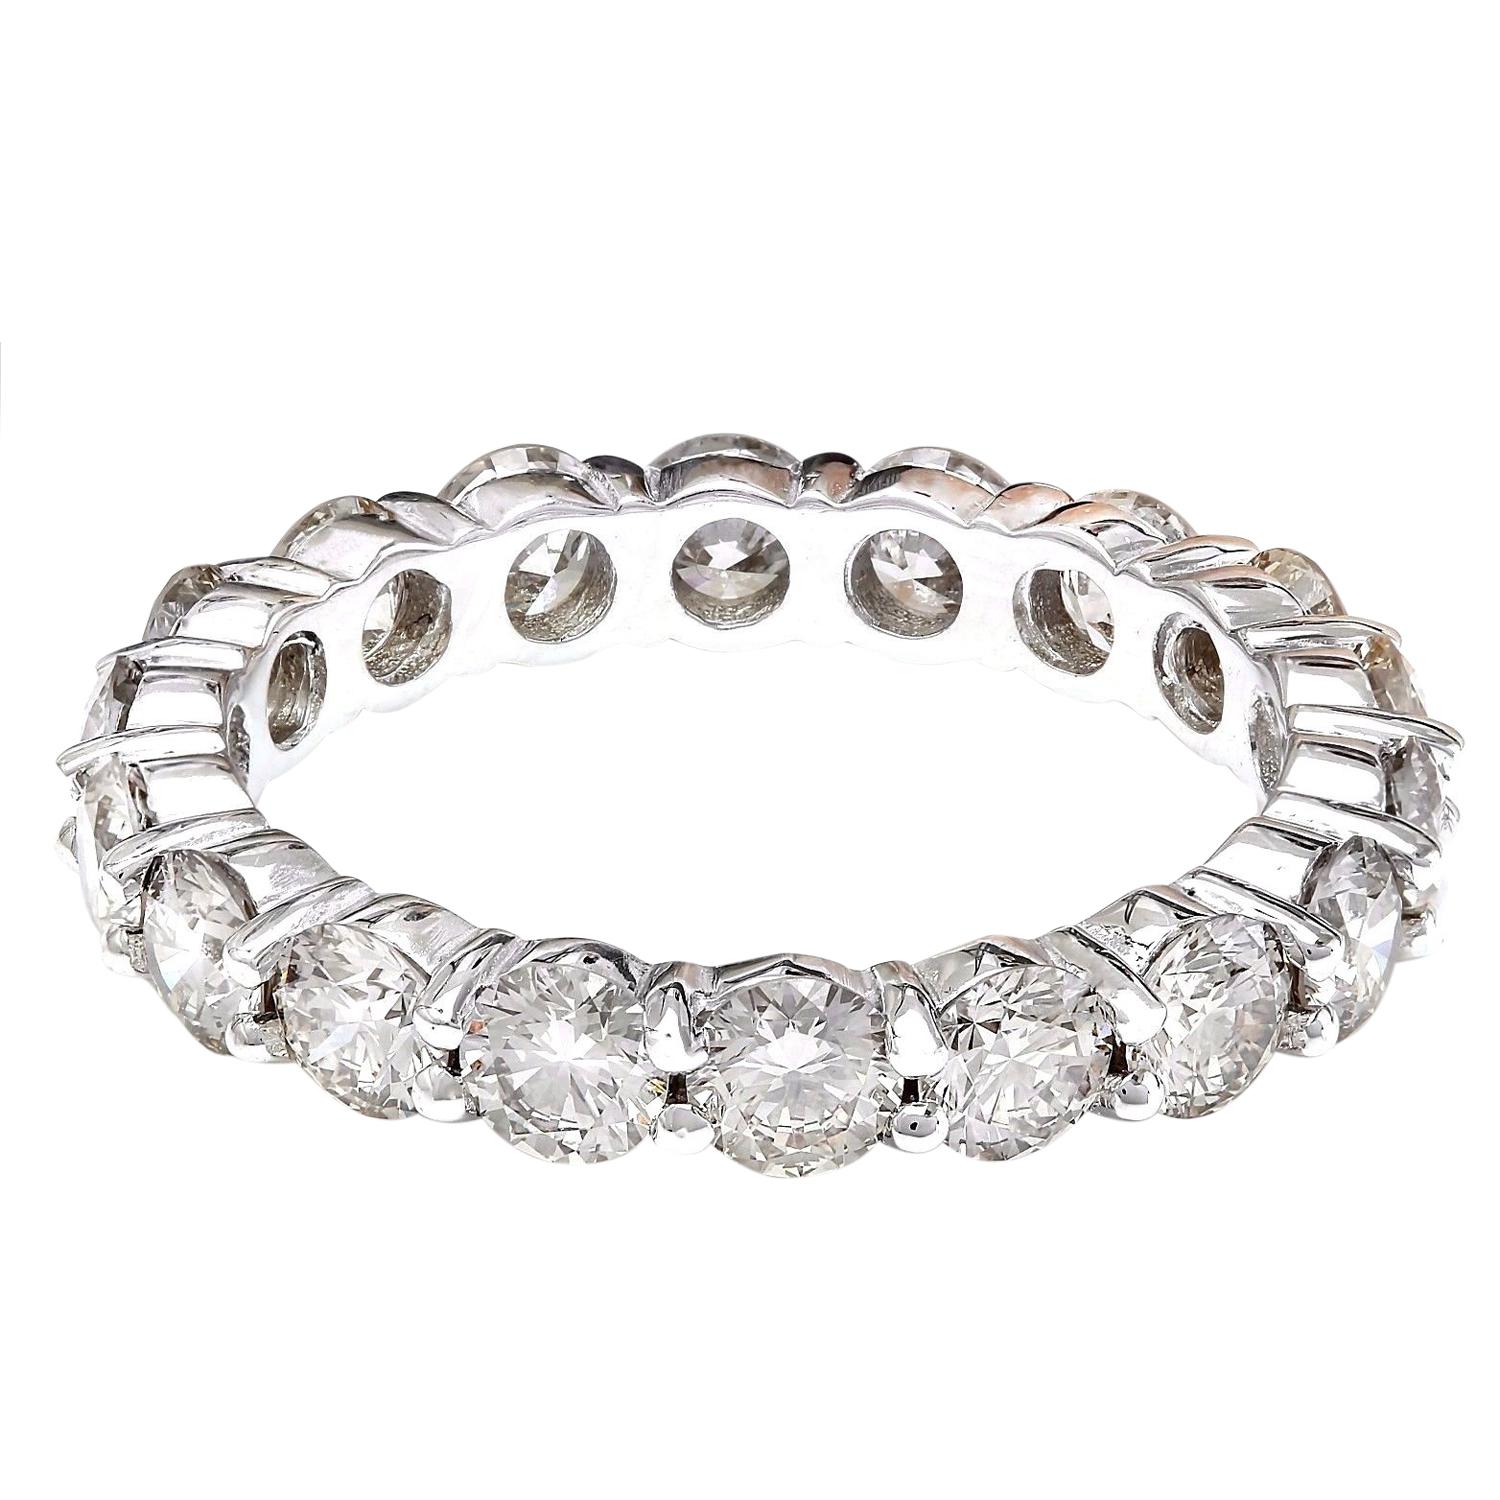 Presenting our exquisite 3.20 Carat Diamond 14K Solid White Gold Eternity Ring. Crafted from luxurious 14K White Gold, this ring features a timeless eternity style. The main attraction is the dazzling round-cut Diamond, weighing a total of 3.20